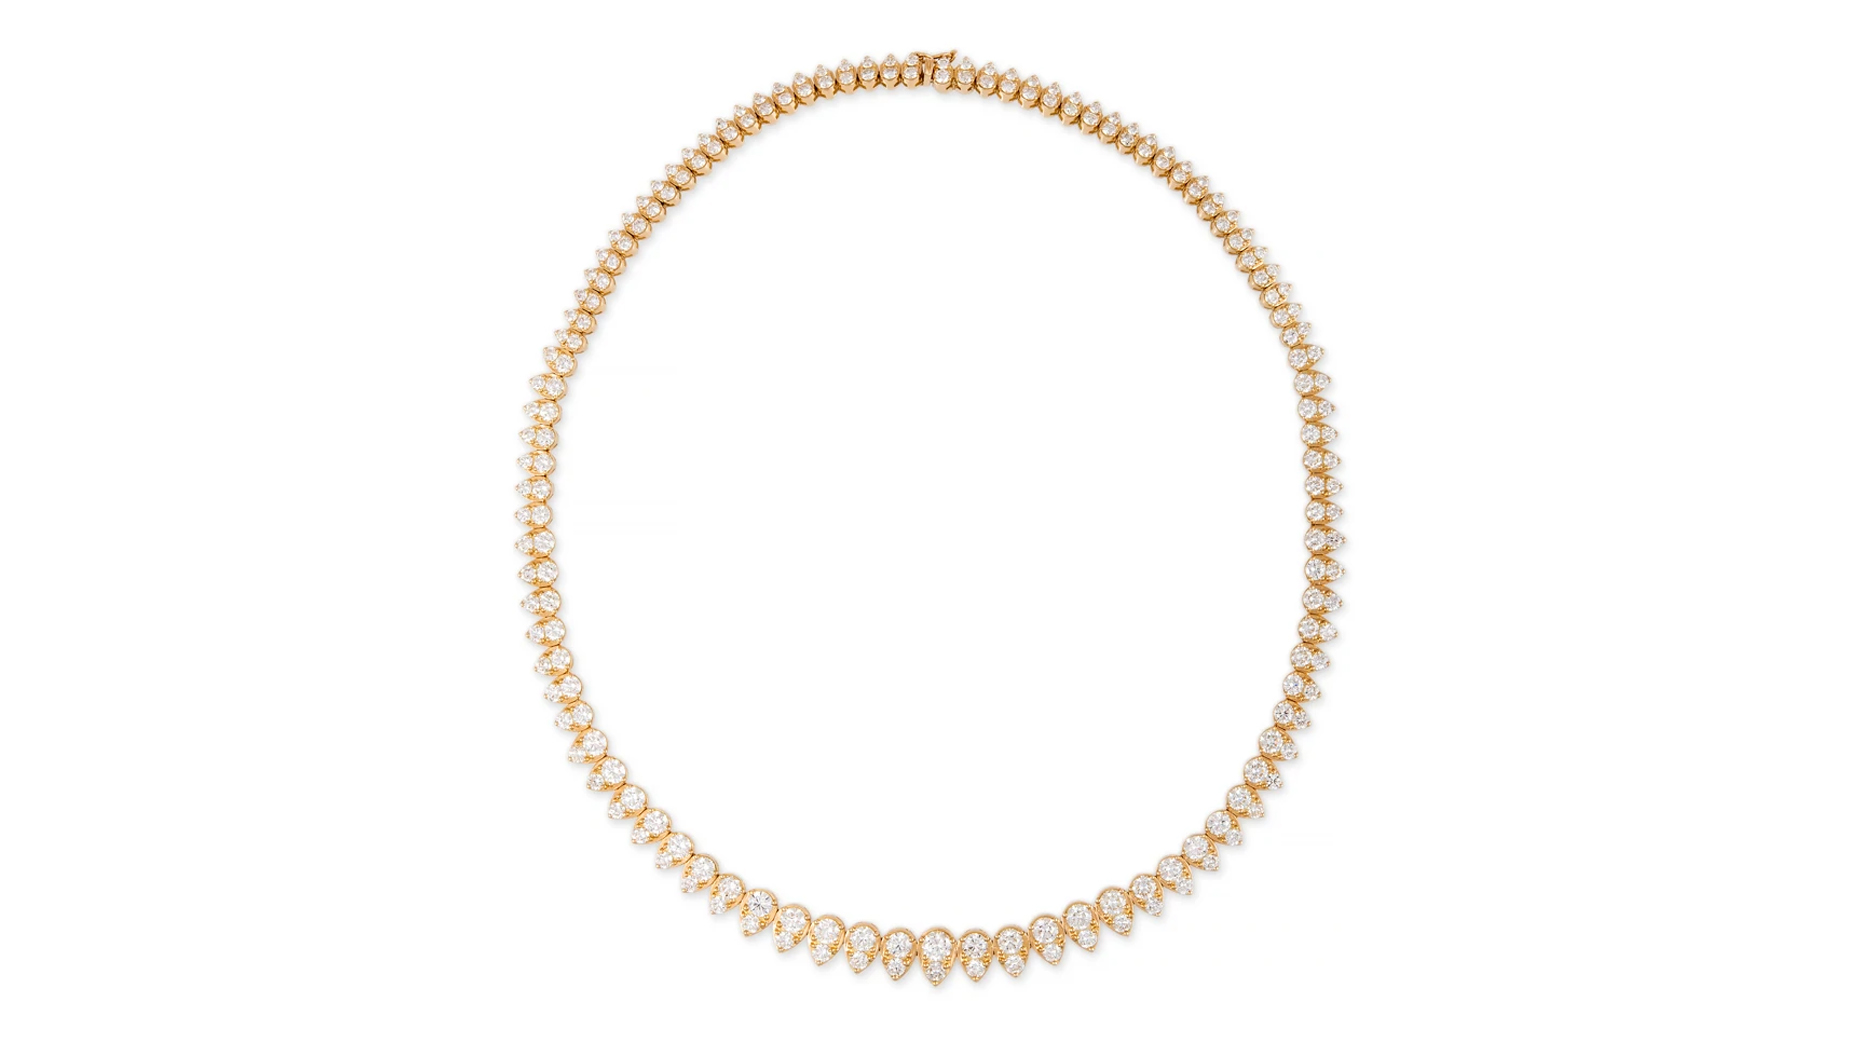 14 karat goldplated Staples hold things with subtle bling